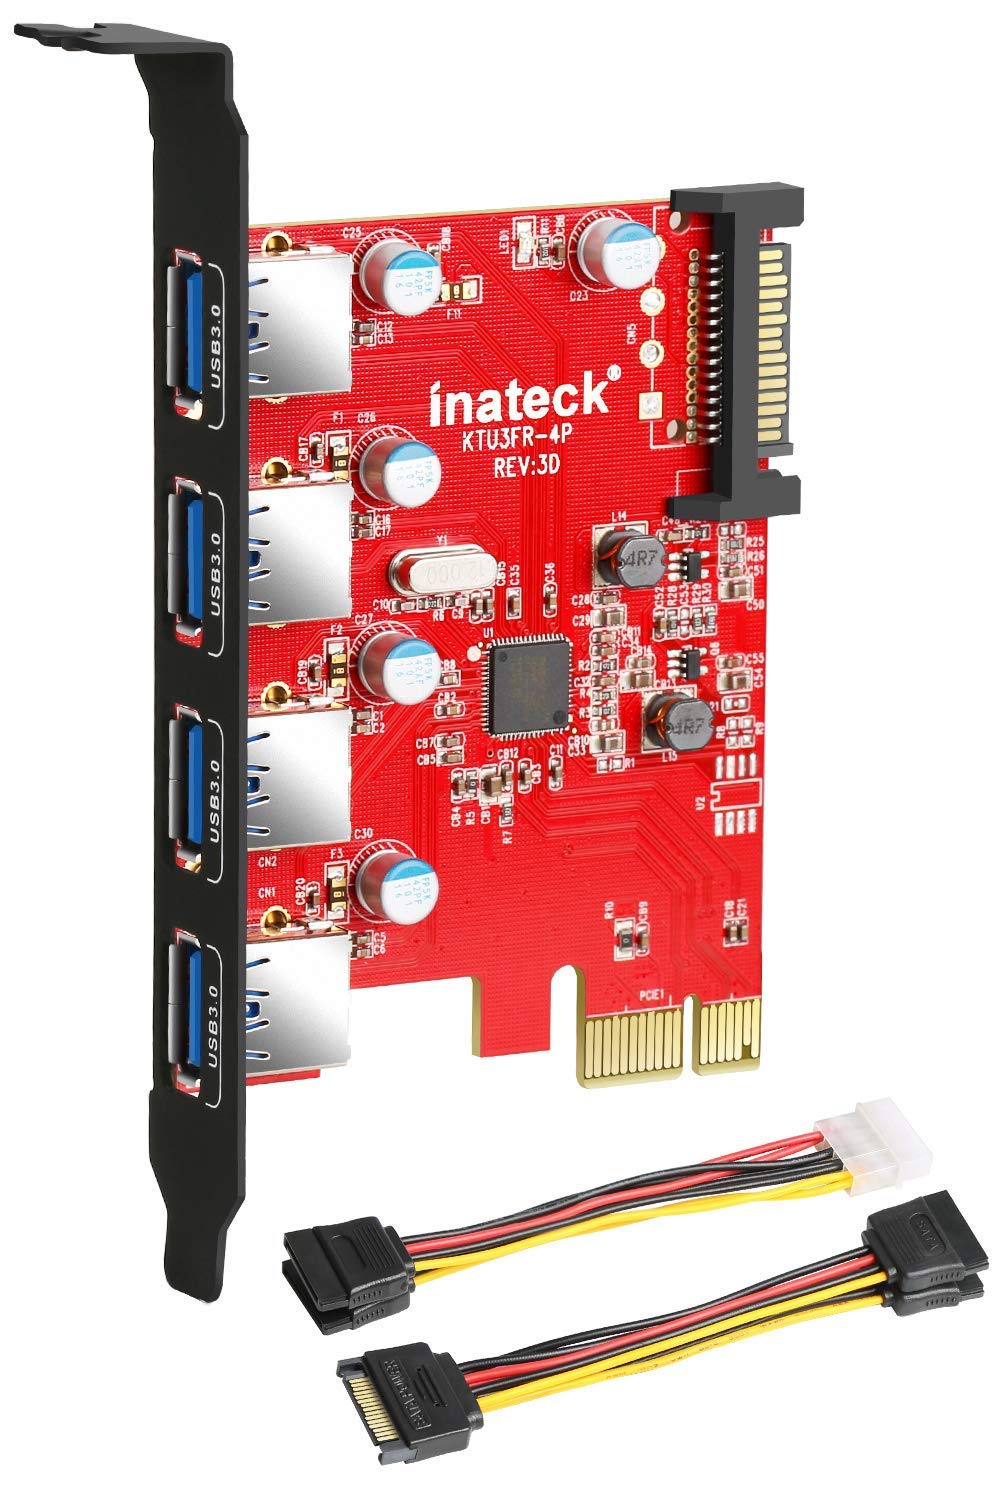  [AUSTRALIA] - Inateck PCI-e to USB 3.0 (4 Ports) PCI Express Card and 15-Pin Power Connector, Red (KT4001)